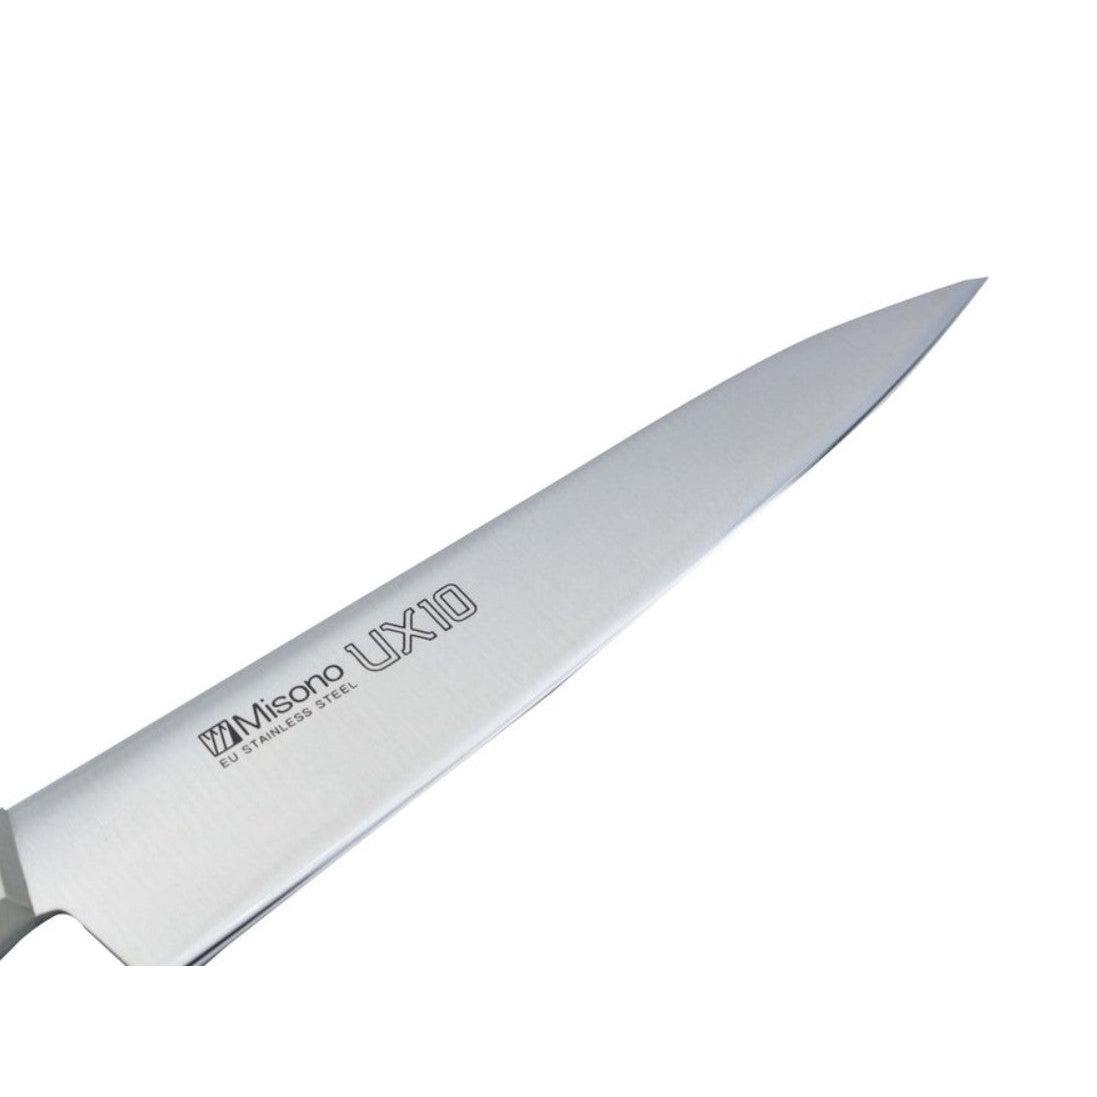 Misono UX10 Stainless Steel Petty Knife 130mm No. 732